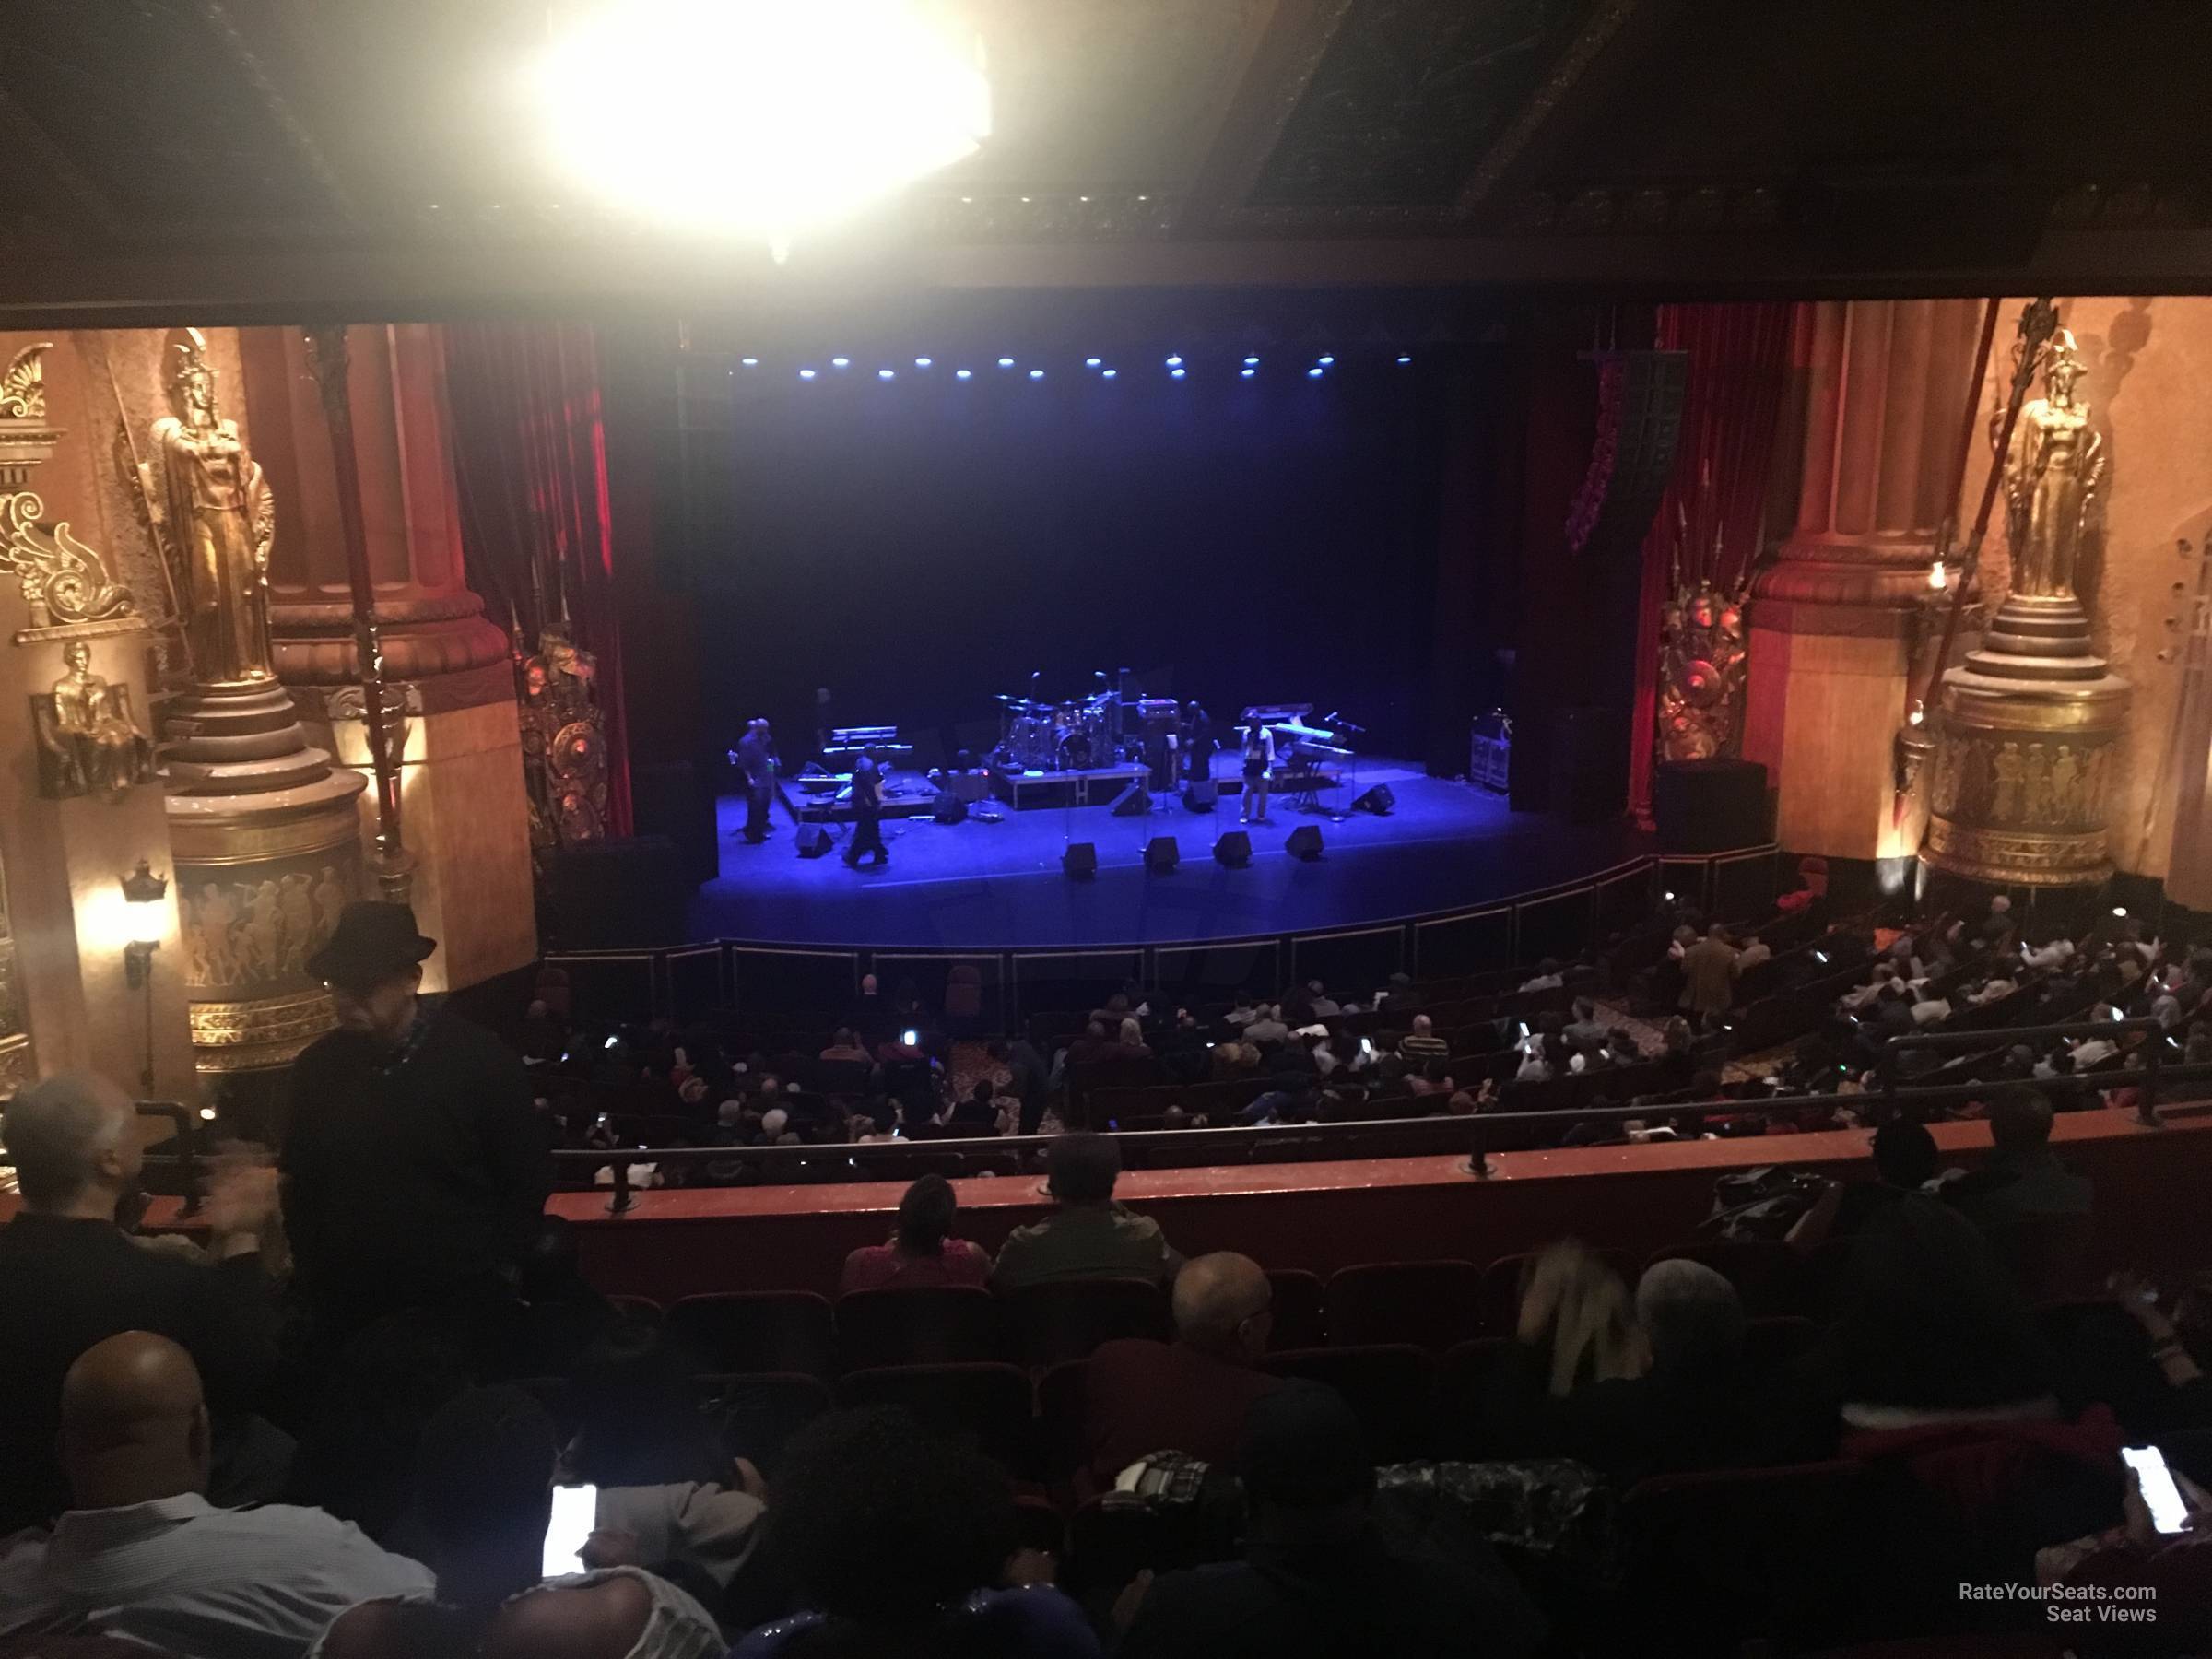 head-on concert view at Beacon Theatre